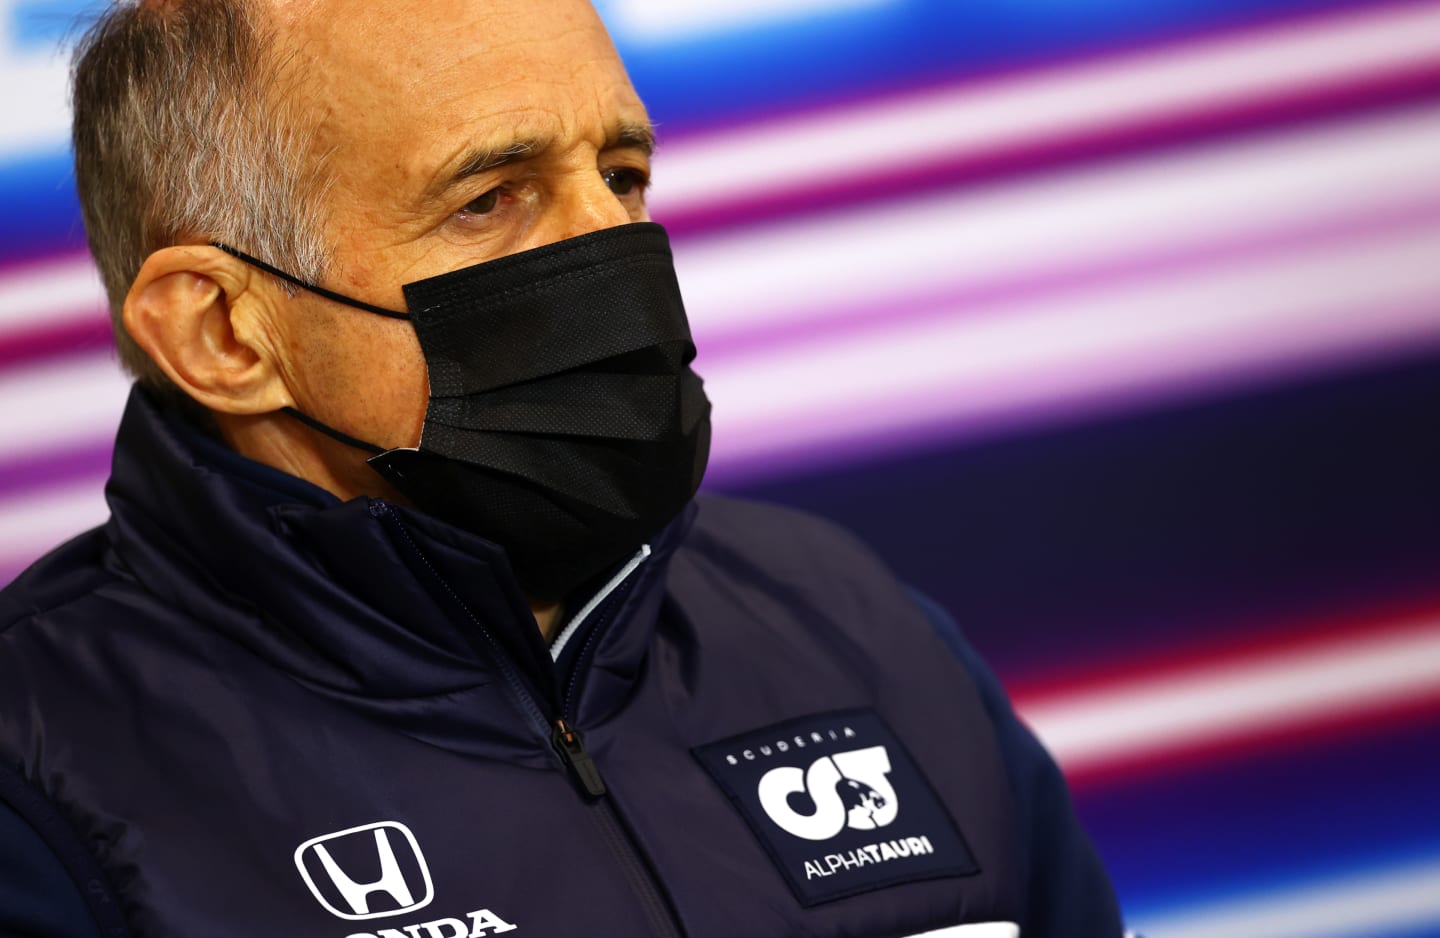 SPA, BELGIUM - AUGUST 27: Scuderia AlphaTauri Team Principal Franz Tost talks in the Team Principals Press Conference during practice ahead of the F1 Grand Prix of Belgium at Circuit de Spa-Francorchamps on August 27, 2021 in Spa, Belgium. (Photo by Dan Istitene/Getty Images)